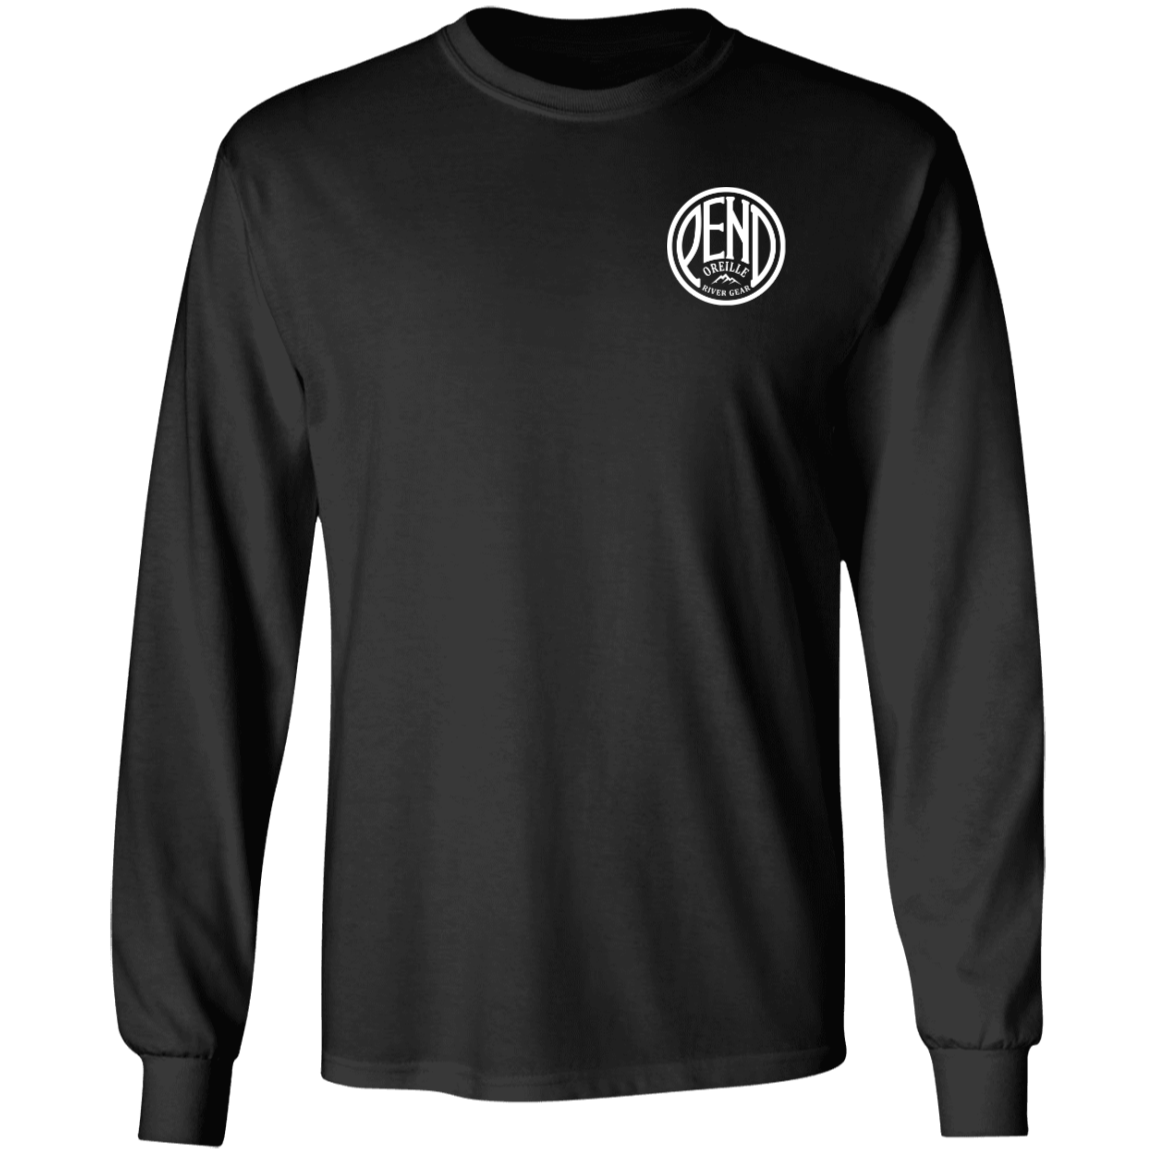 Float Pend (Front & Back) - Long Sleeve